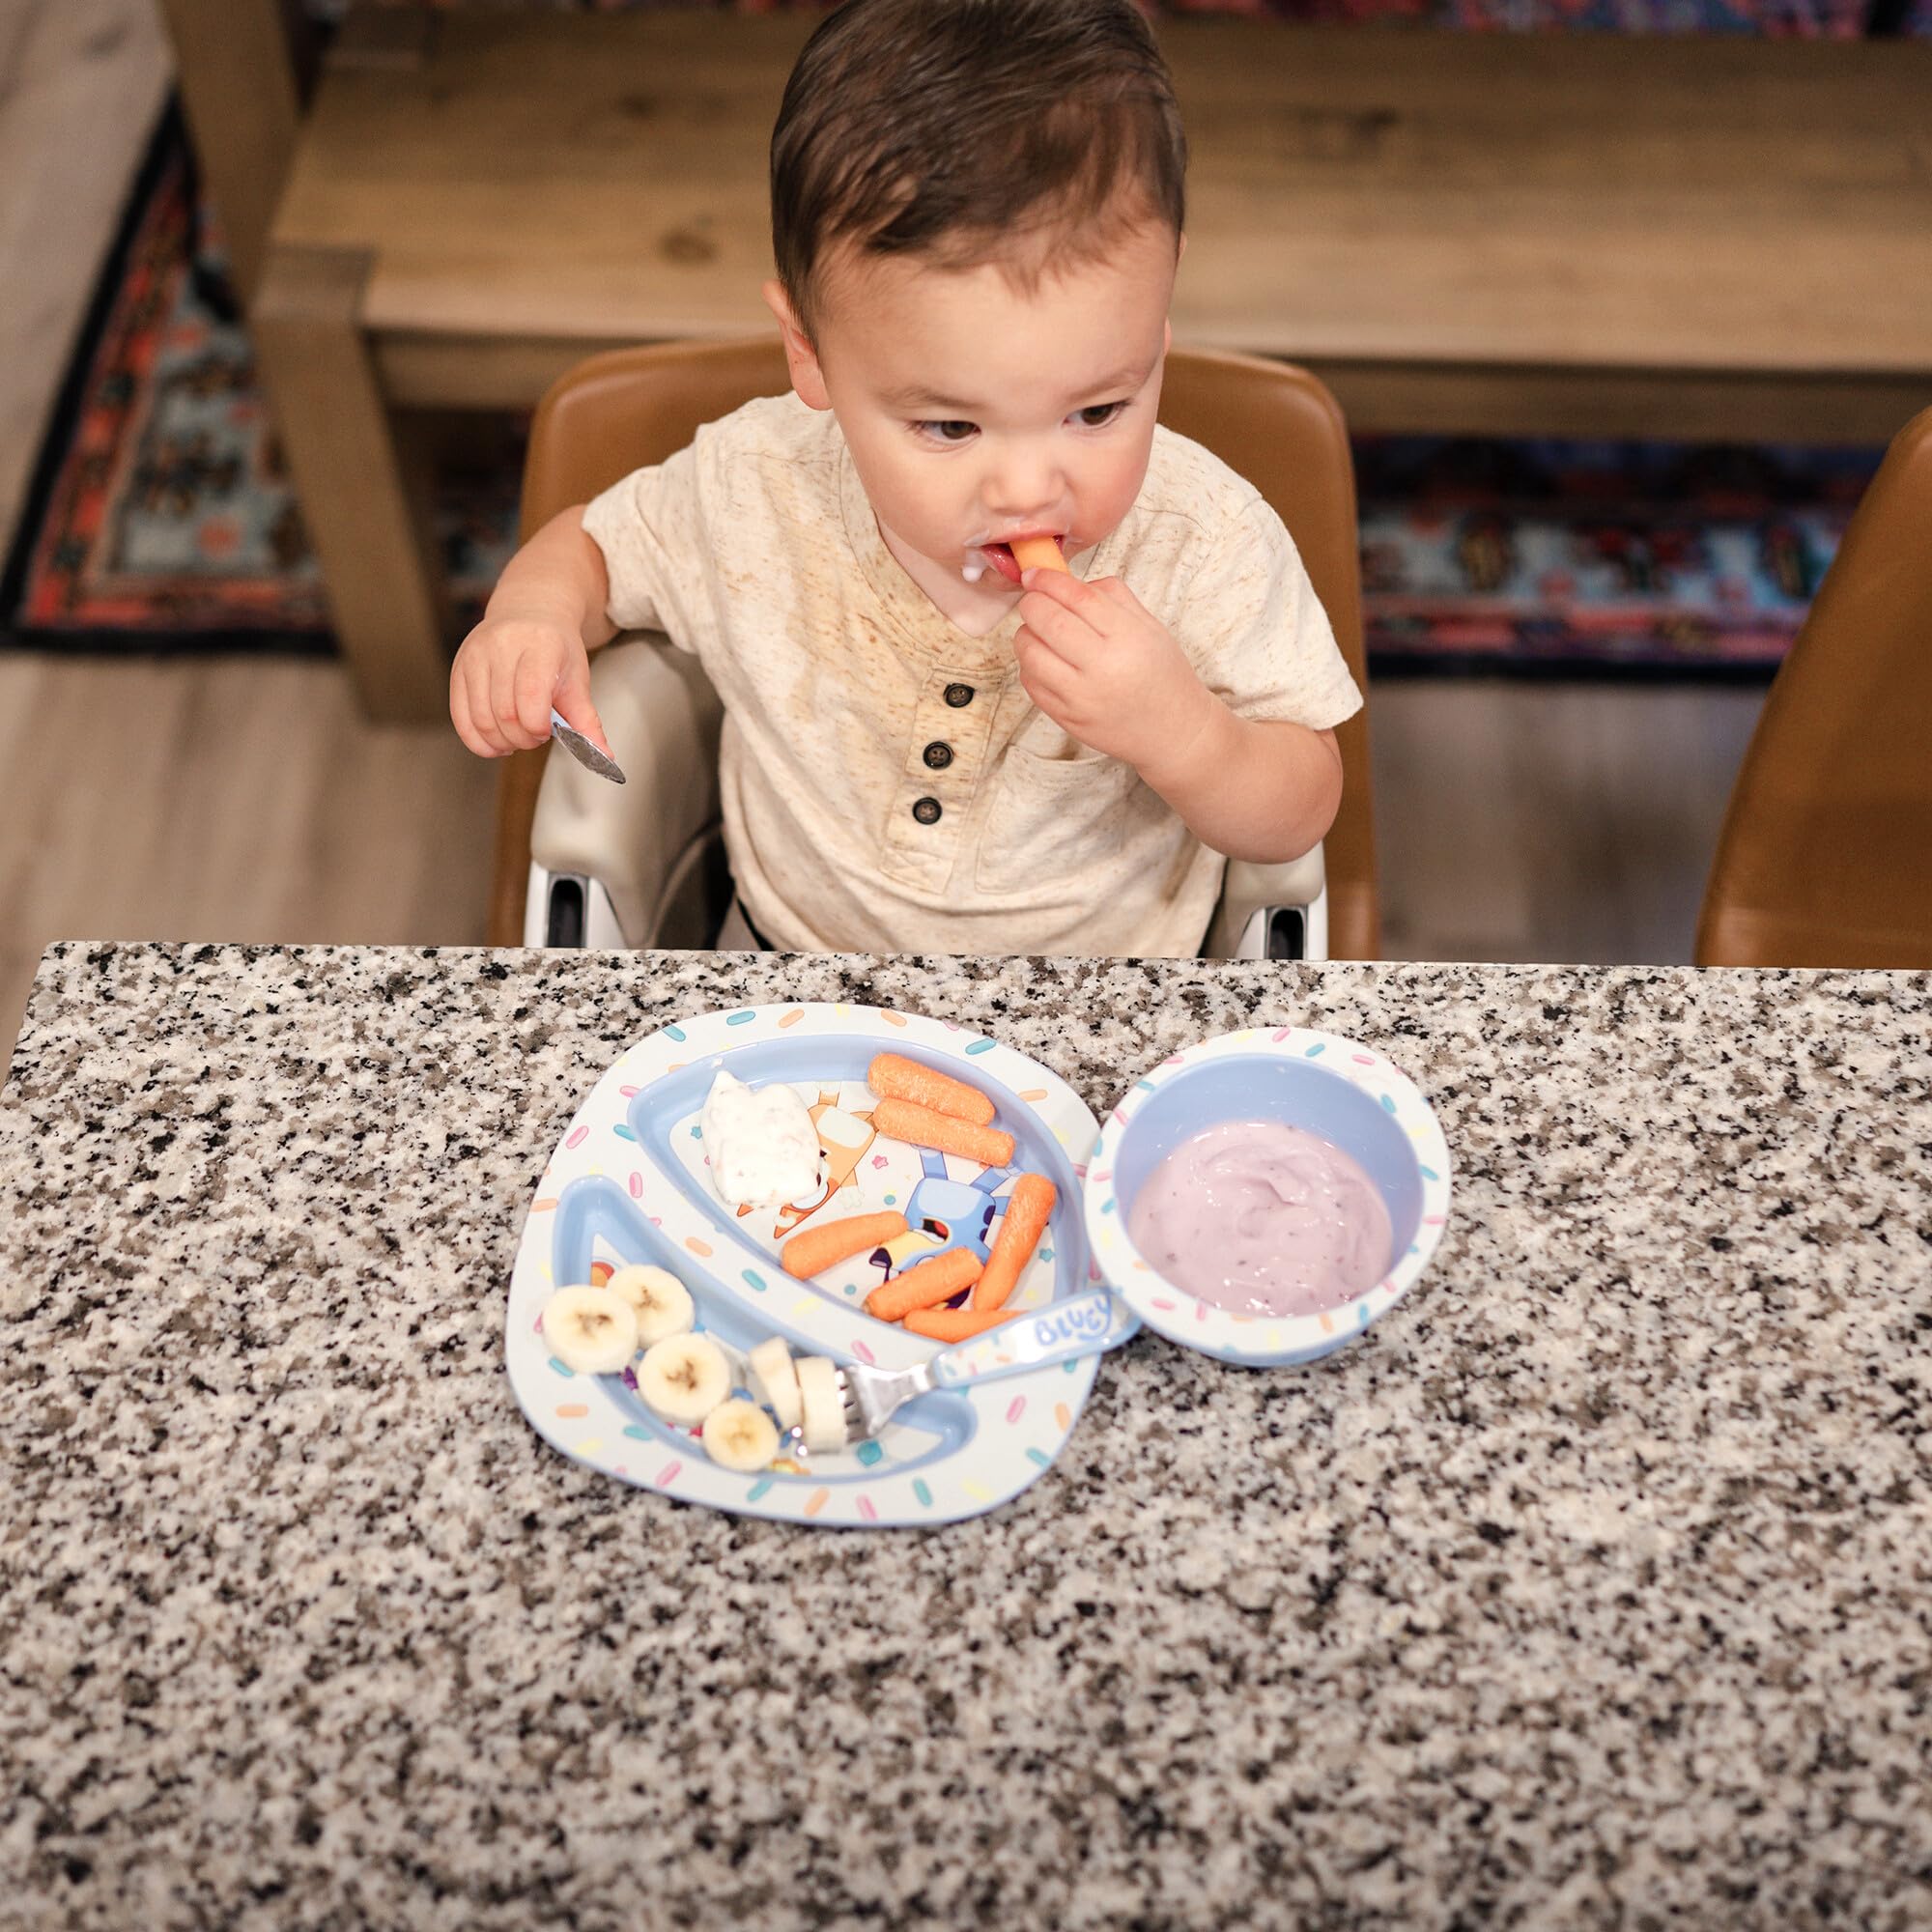 The First Years Bluey Toddler Dinnerware Set - Includes Divided Toddler Plate, Bowl, and Toddler Utensils - Dishwasher Safe Toddler Feeding Supplies Made Without BPA - 4 Count